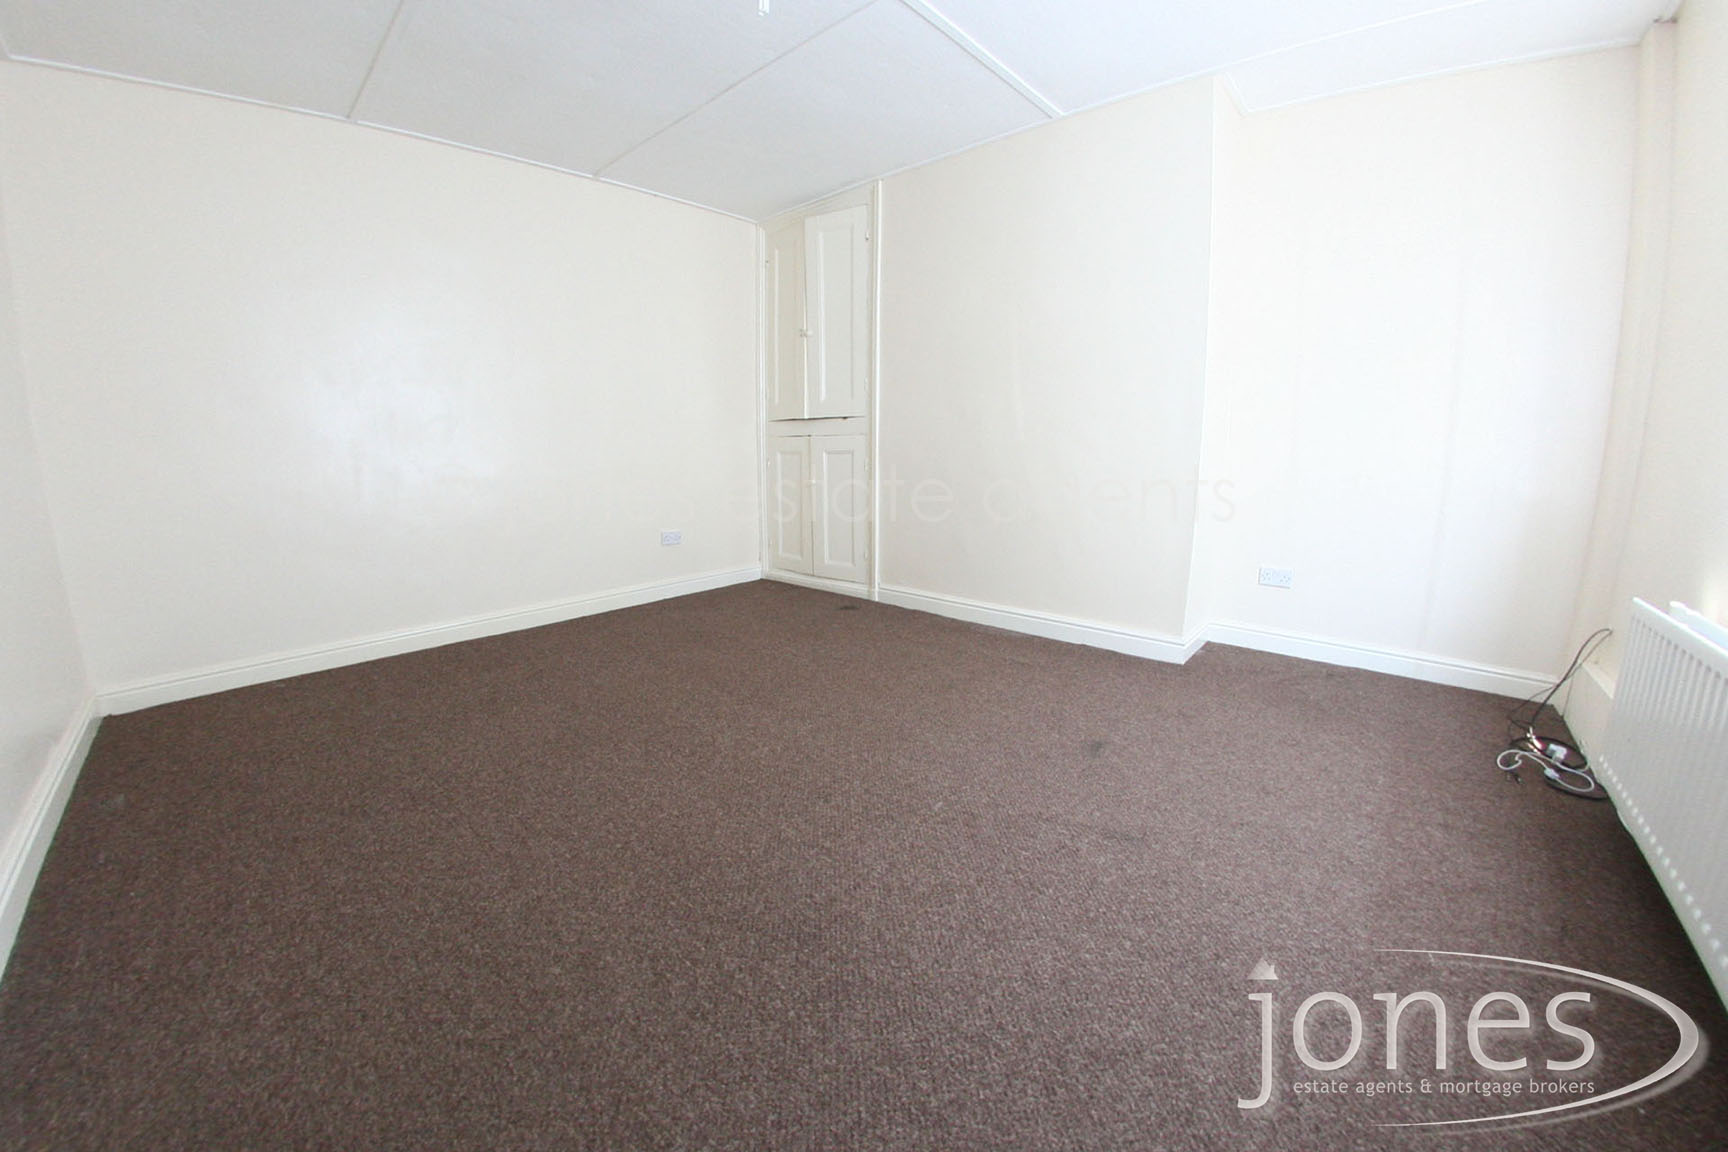 Home for Sale Let - Photo 02 North Road West,Wingate,TS28 5AP